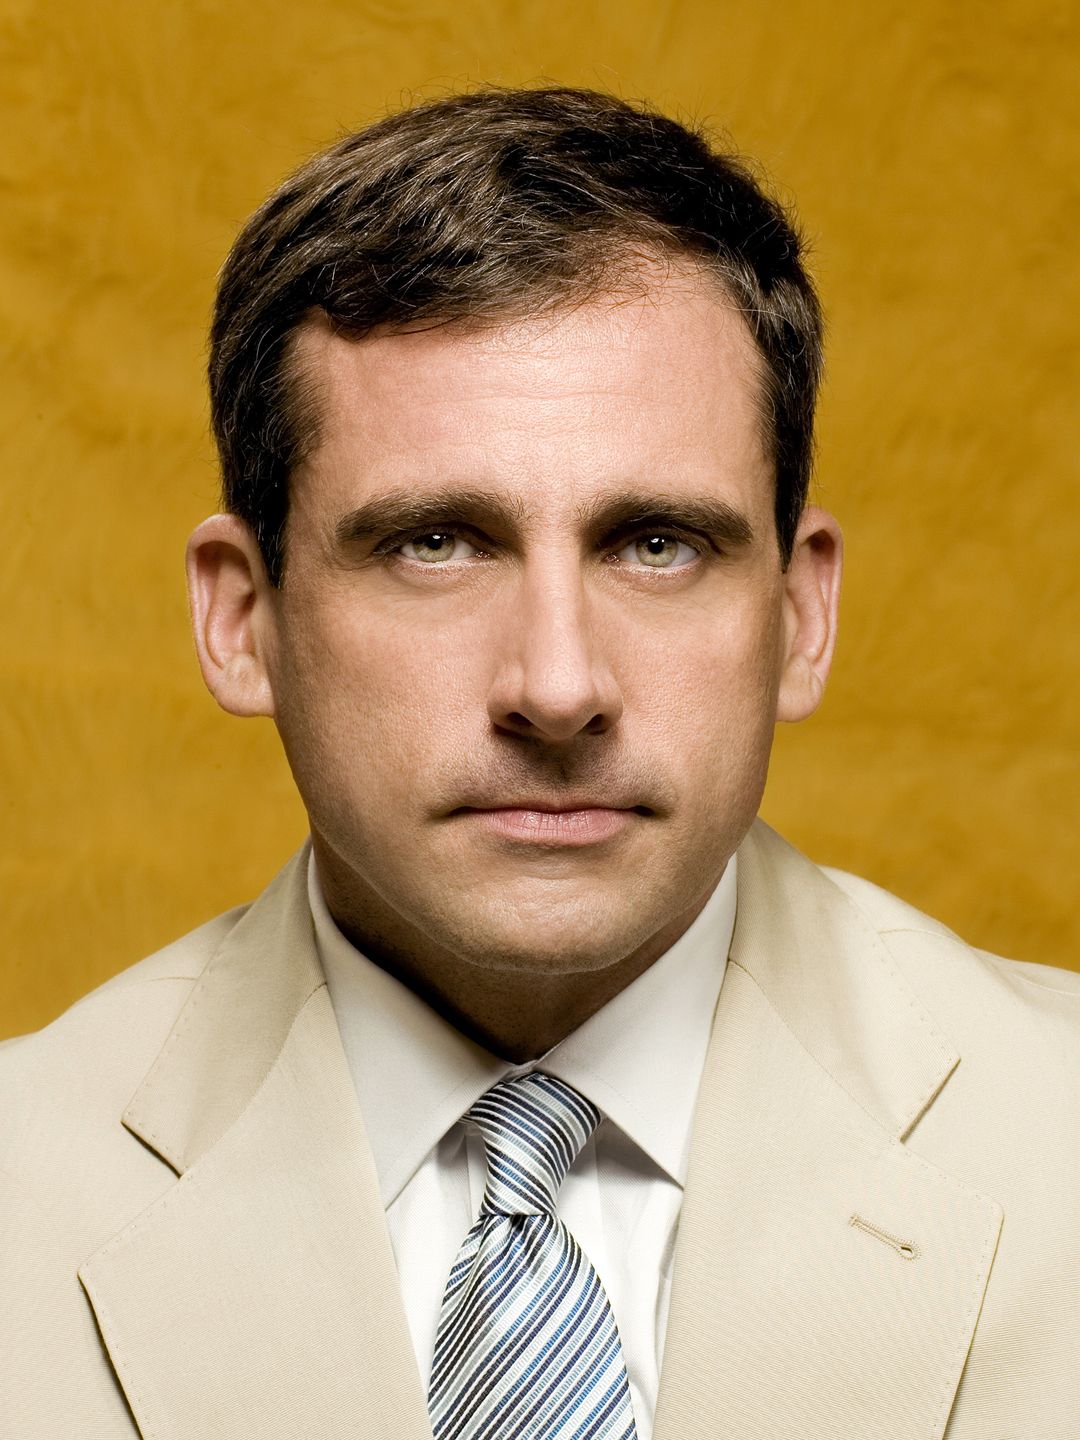 Steve Carell in real life